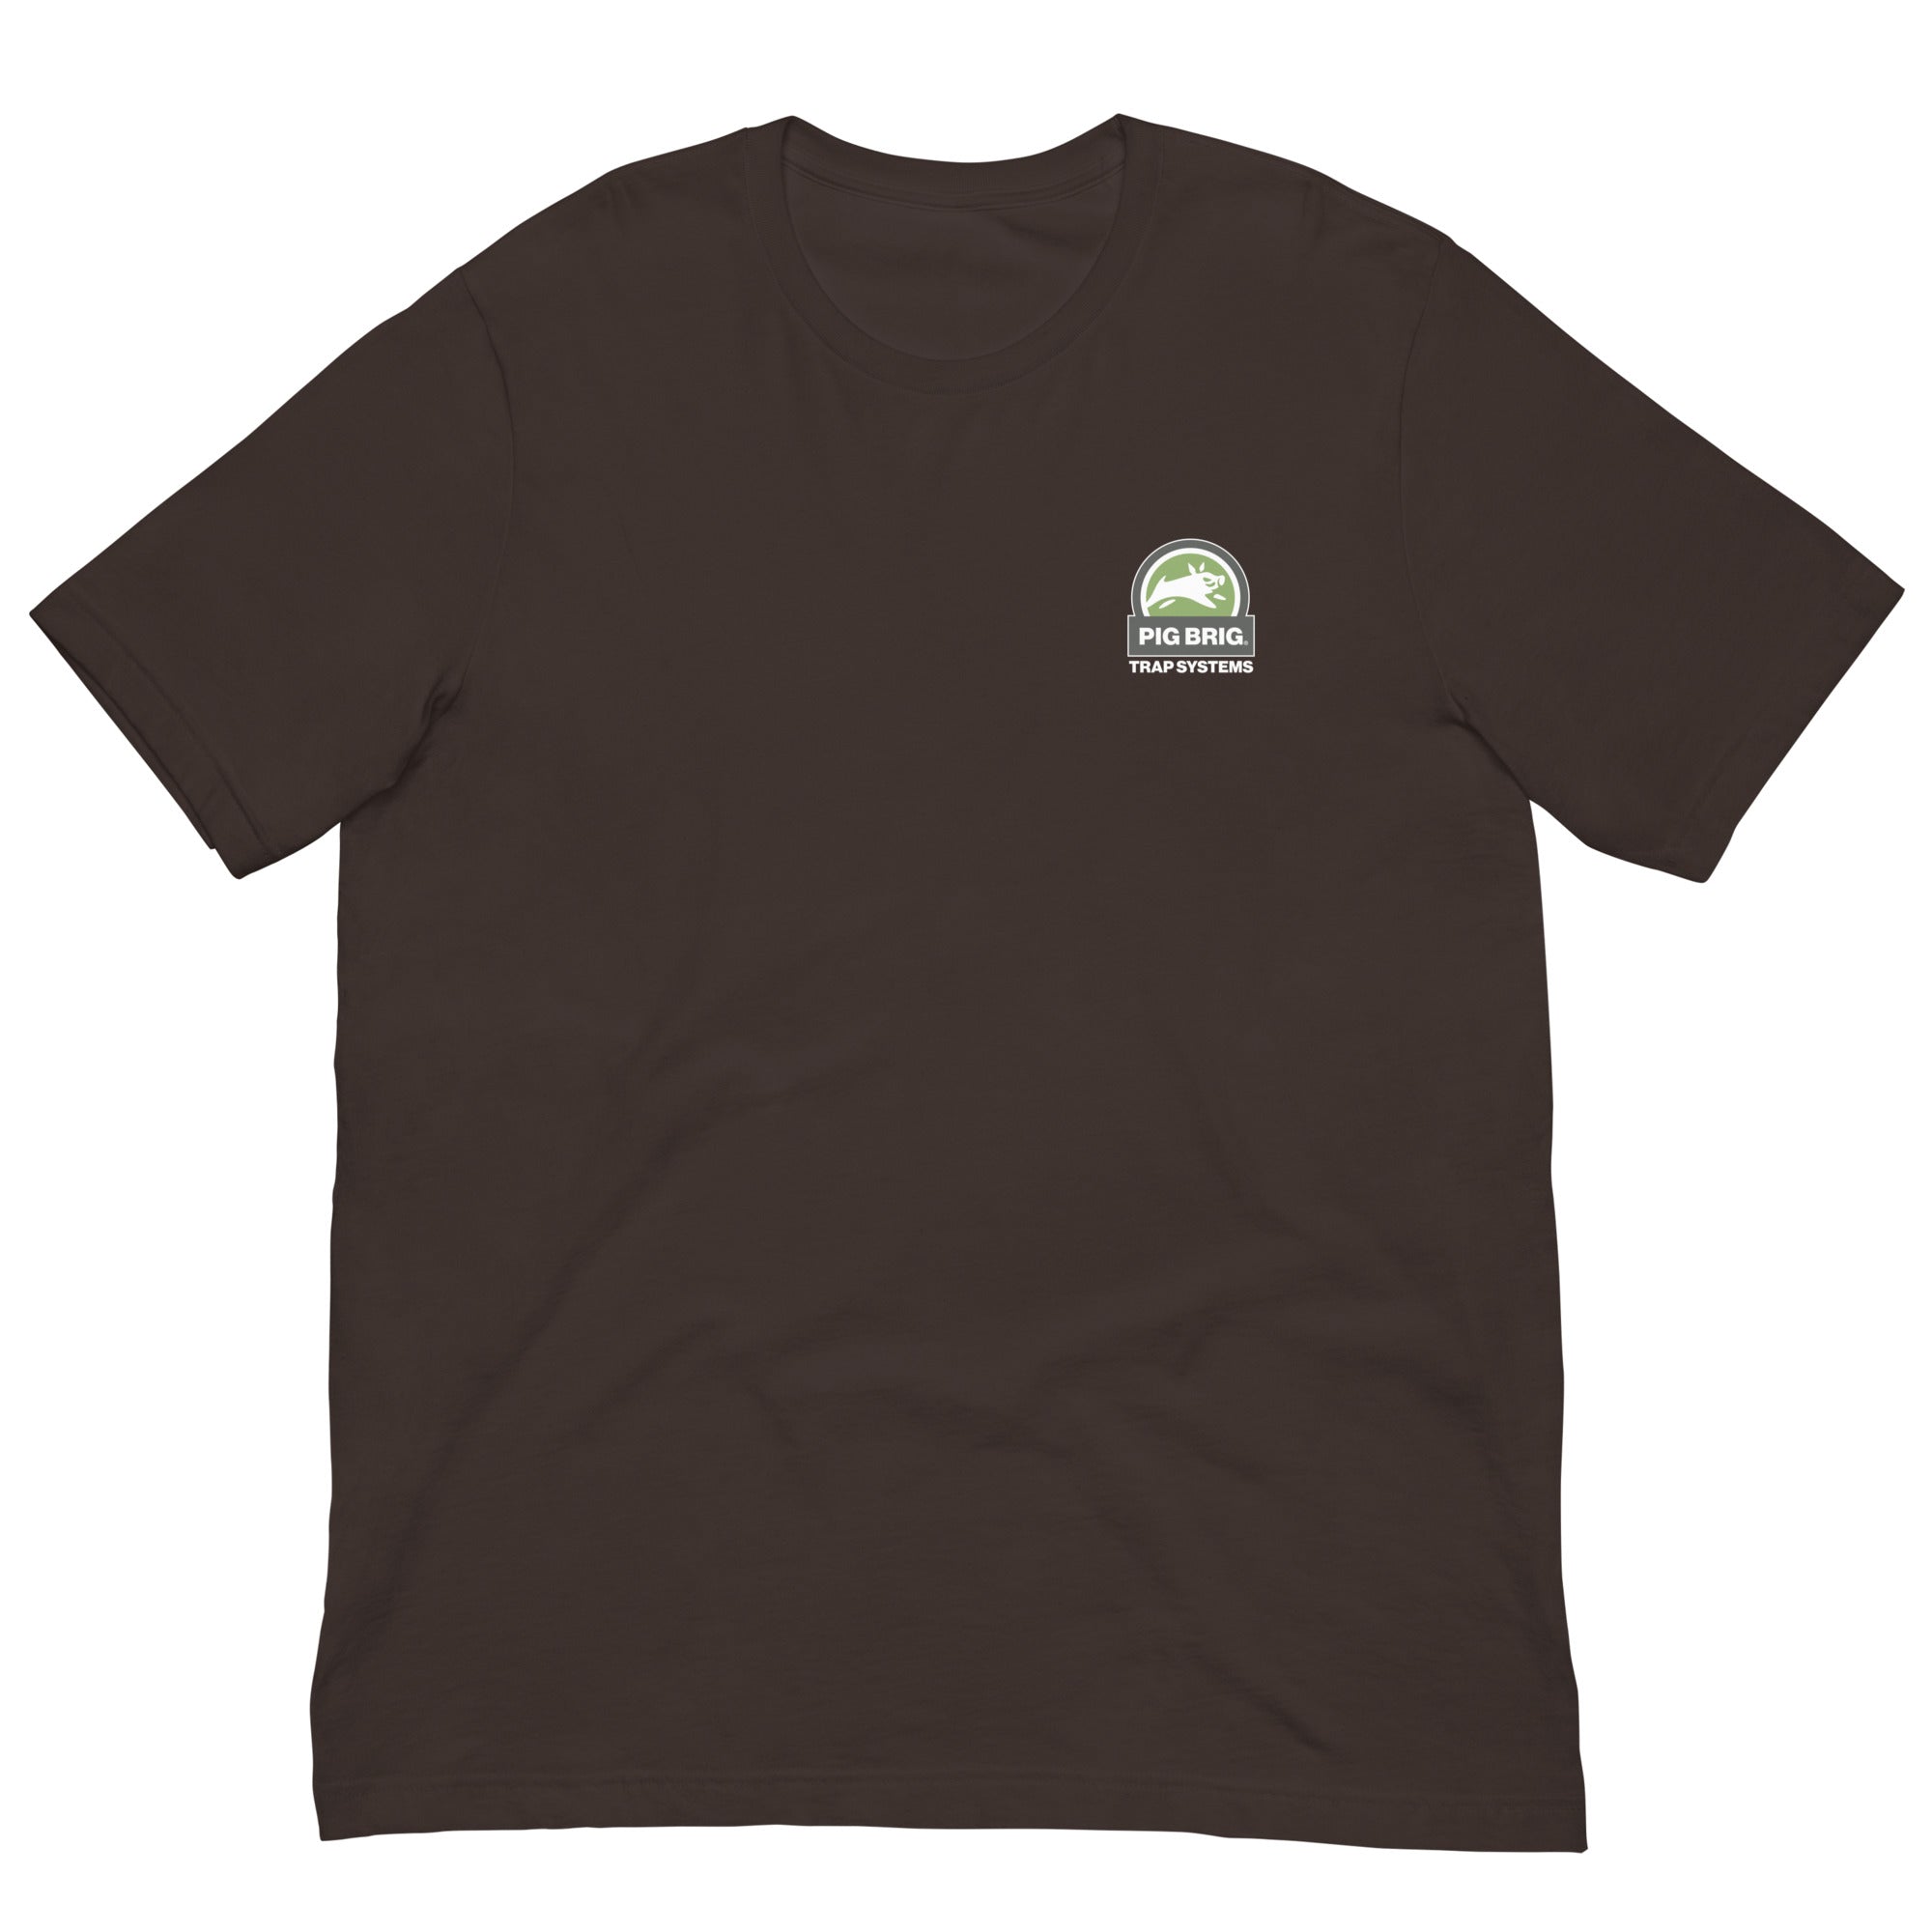 Sounder Pounder - Double Sided T-Shirt